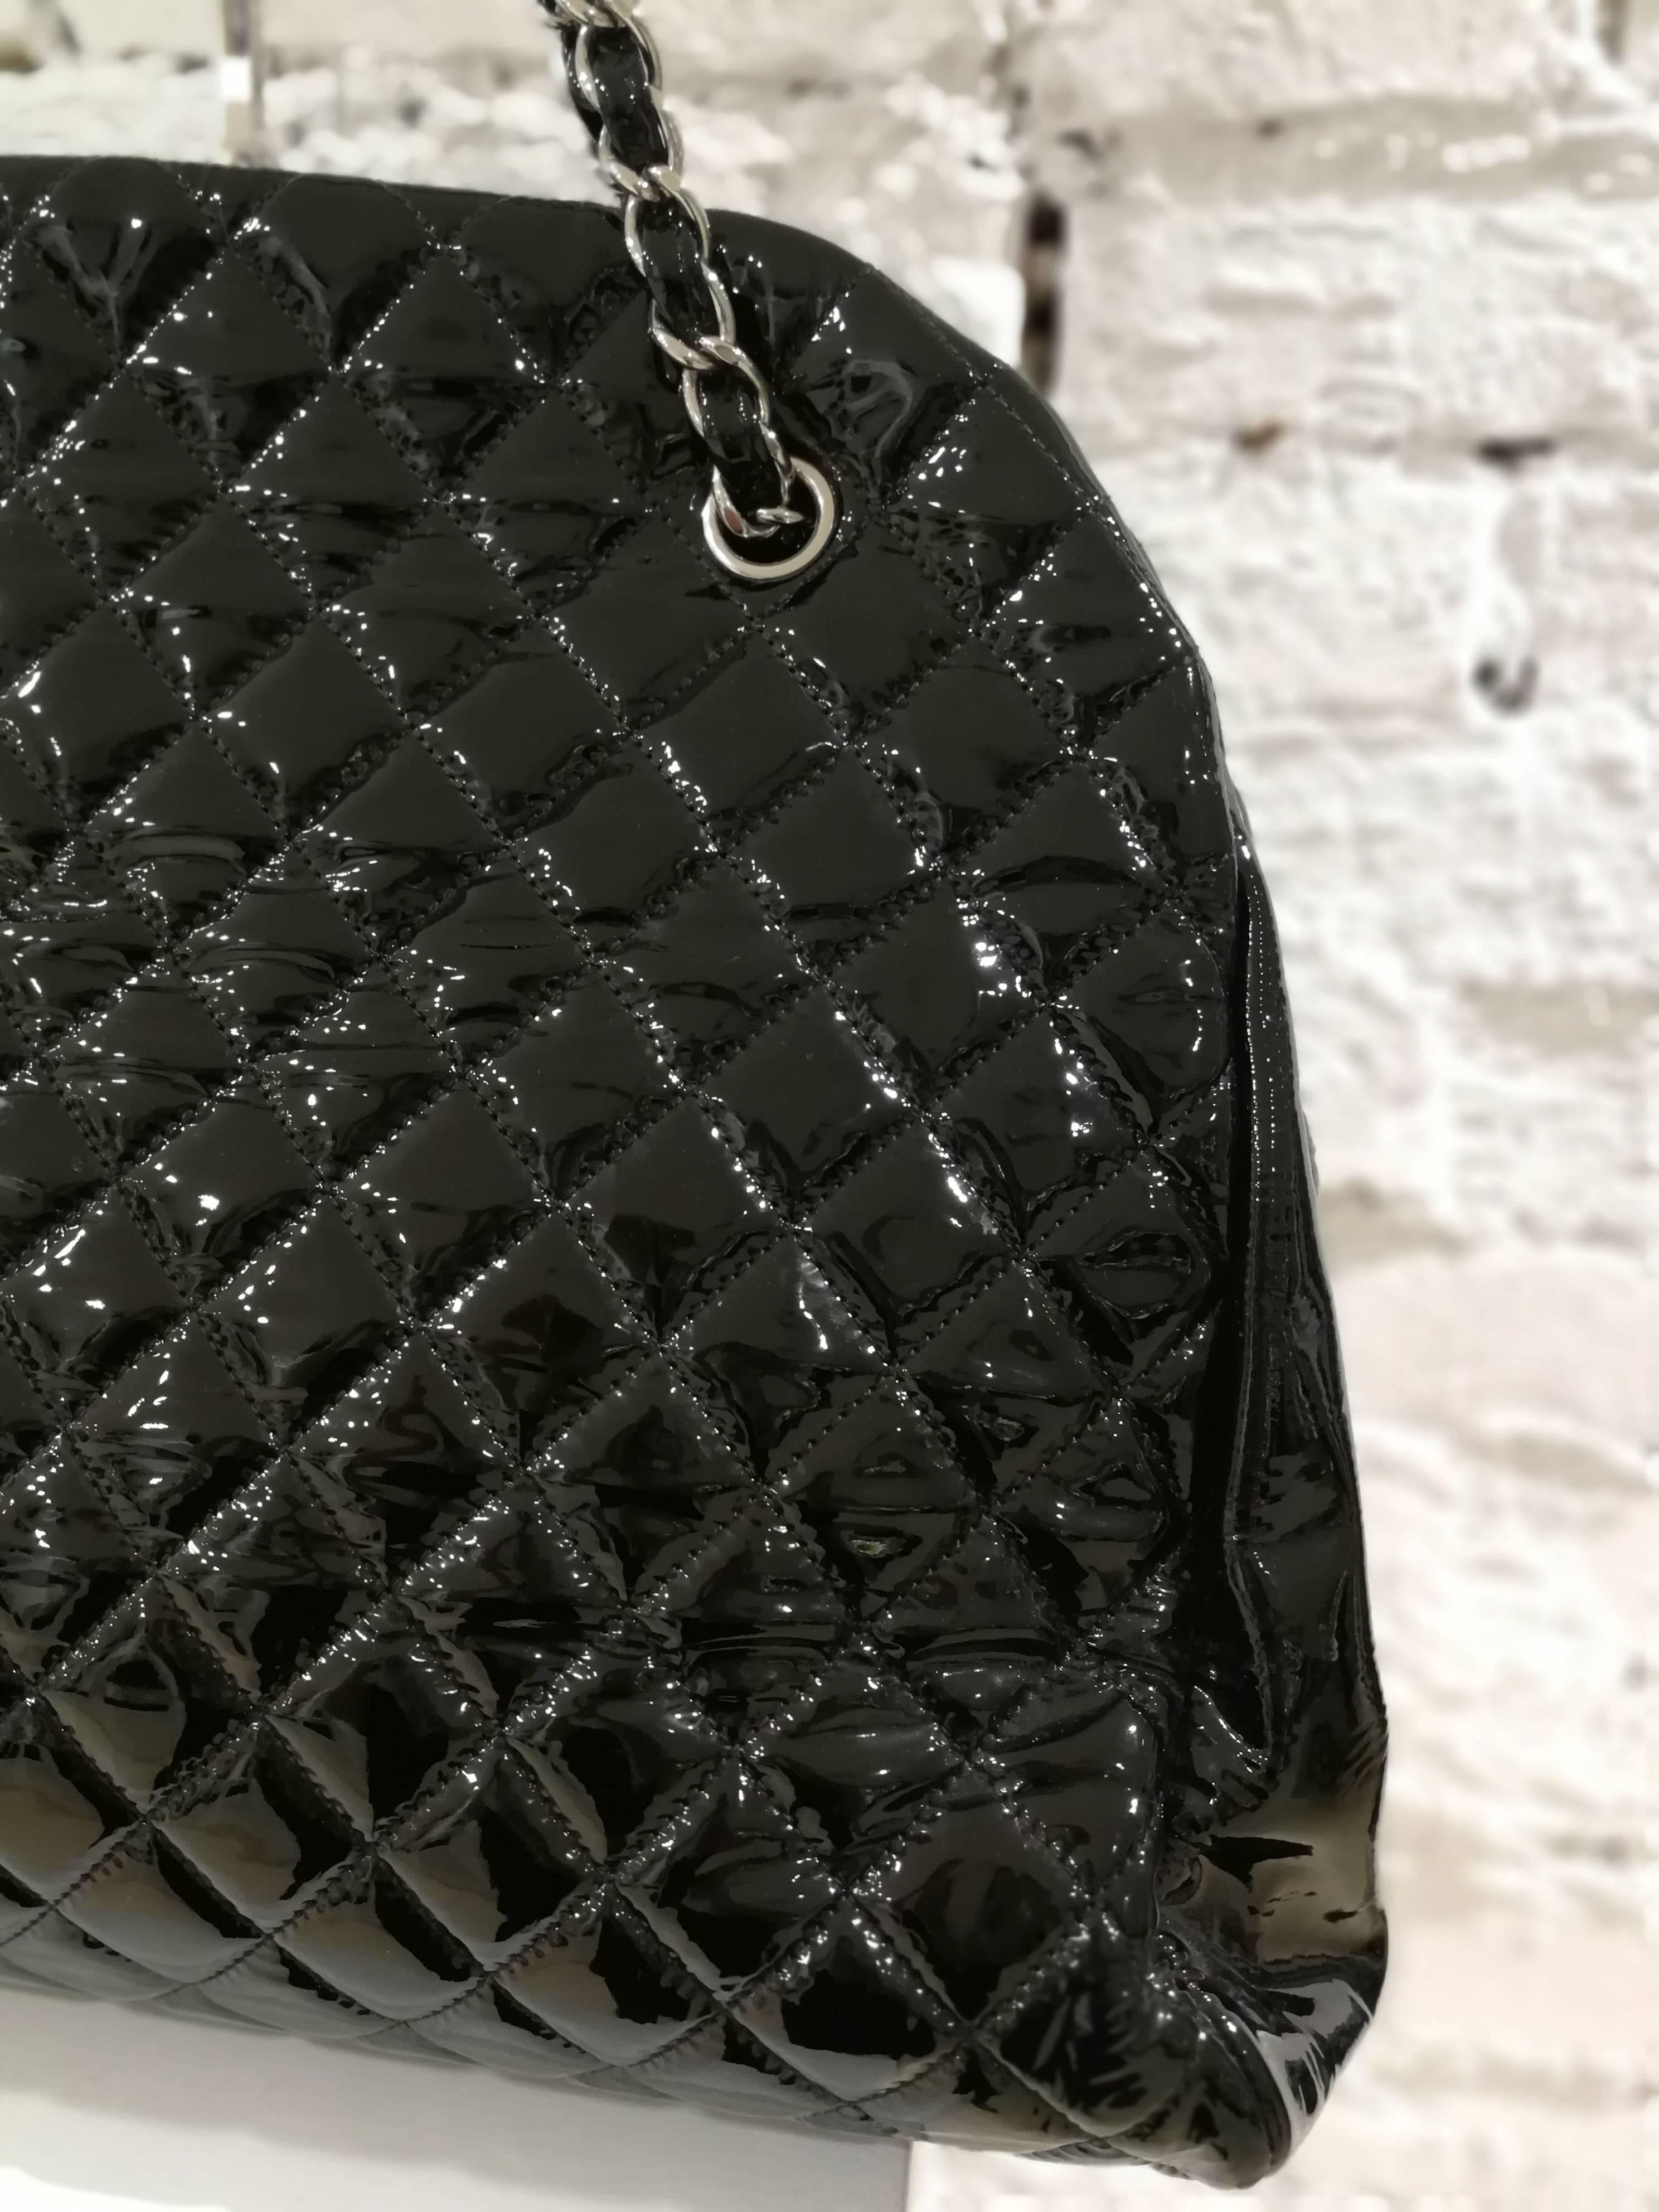 Chanel Just Mademoiselle Bowler Black patent Leather Bag 9